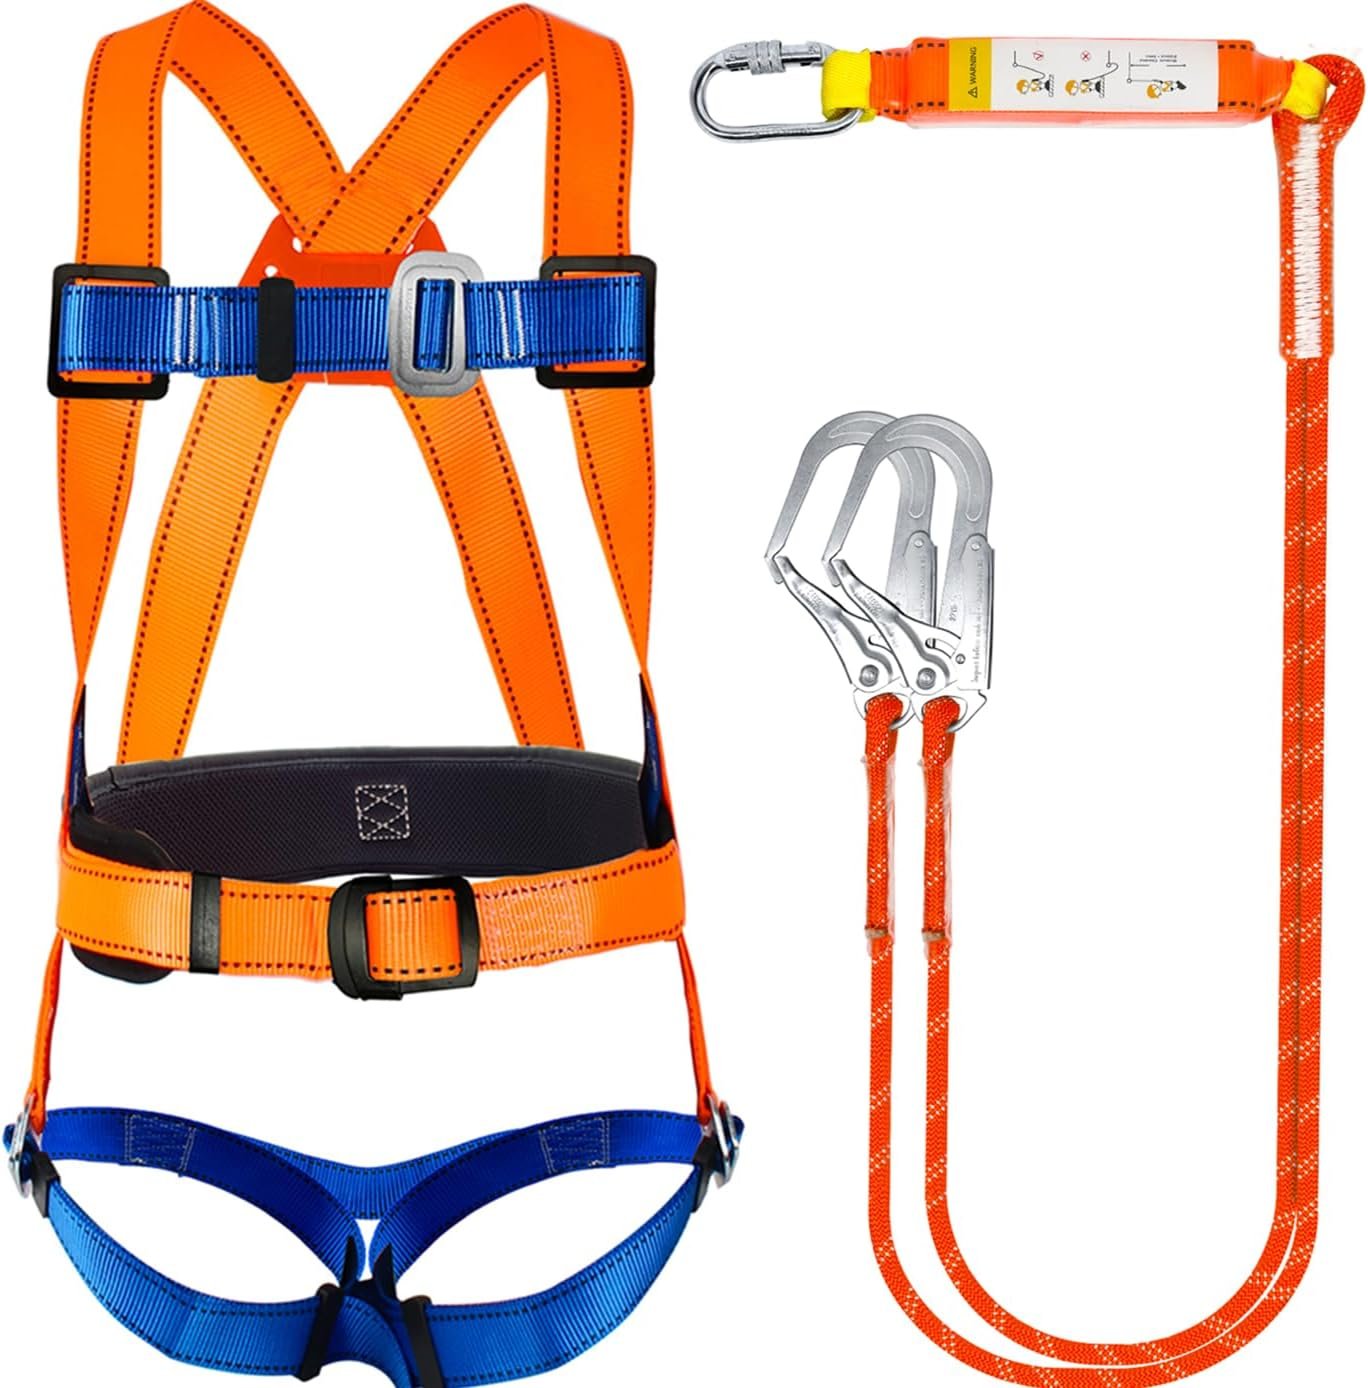 Climbing Harnesses: A Comparative Review